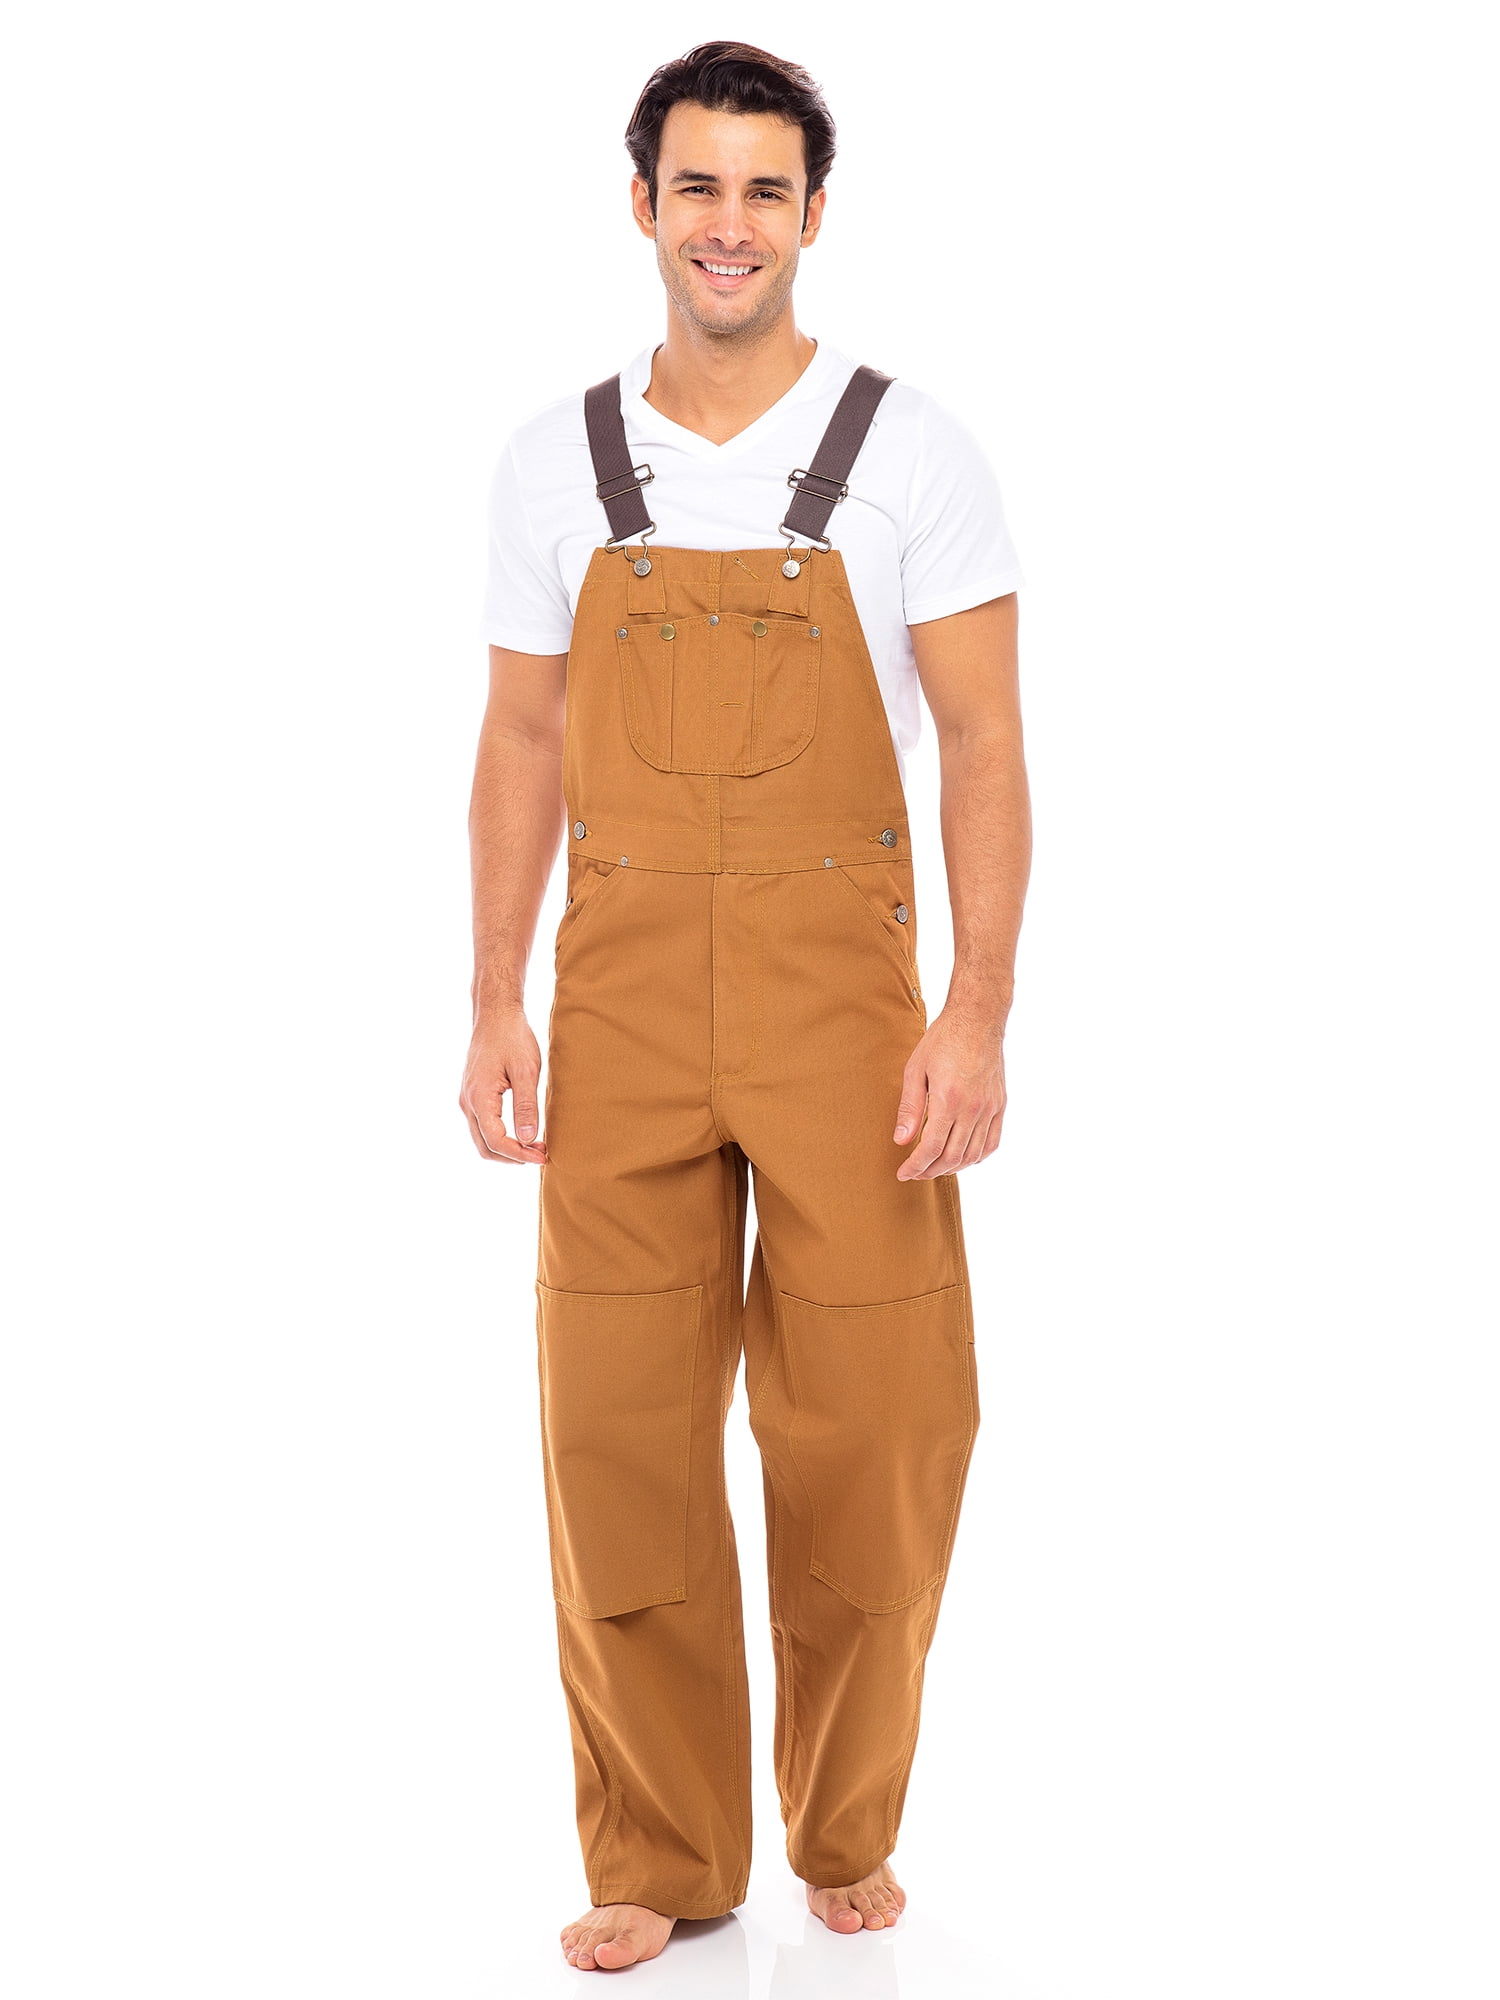 Mens Work Dungarees Bib and Brace Overall Working Trousers Multi Pockets Pants 